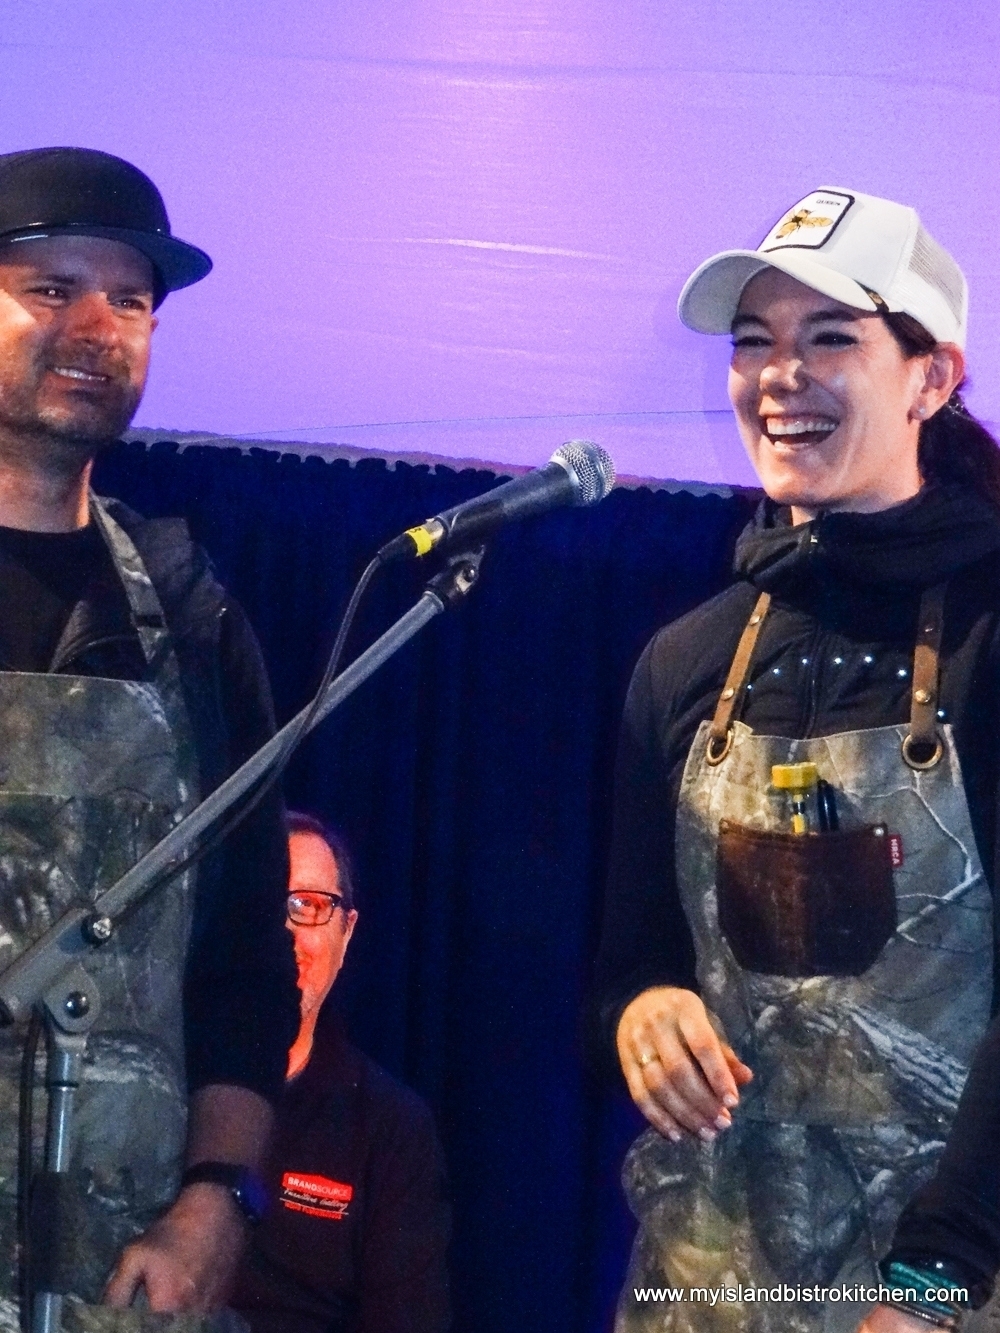 Guest Chefs John Jackson and Connie DeSousa from Charcut Roast House in Calgary, AB, at "Taste of North Rustico" PEI 2017